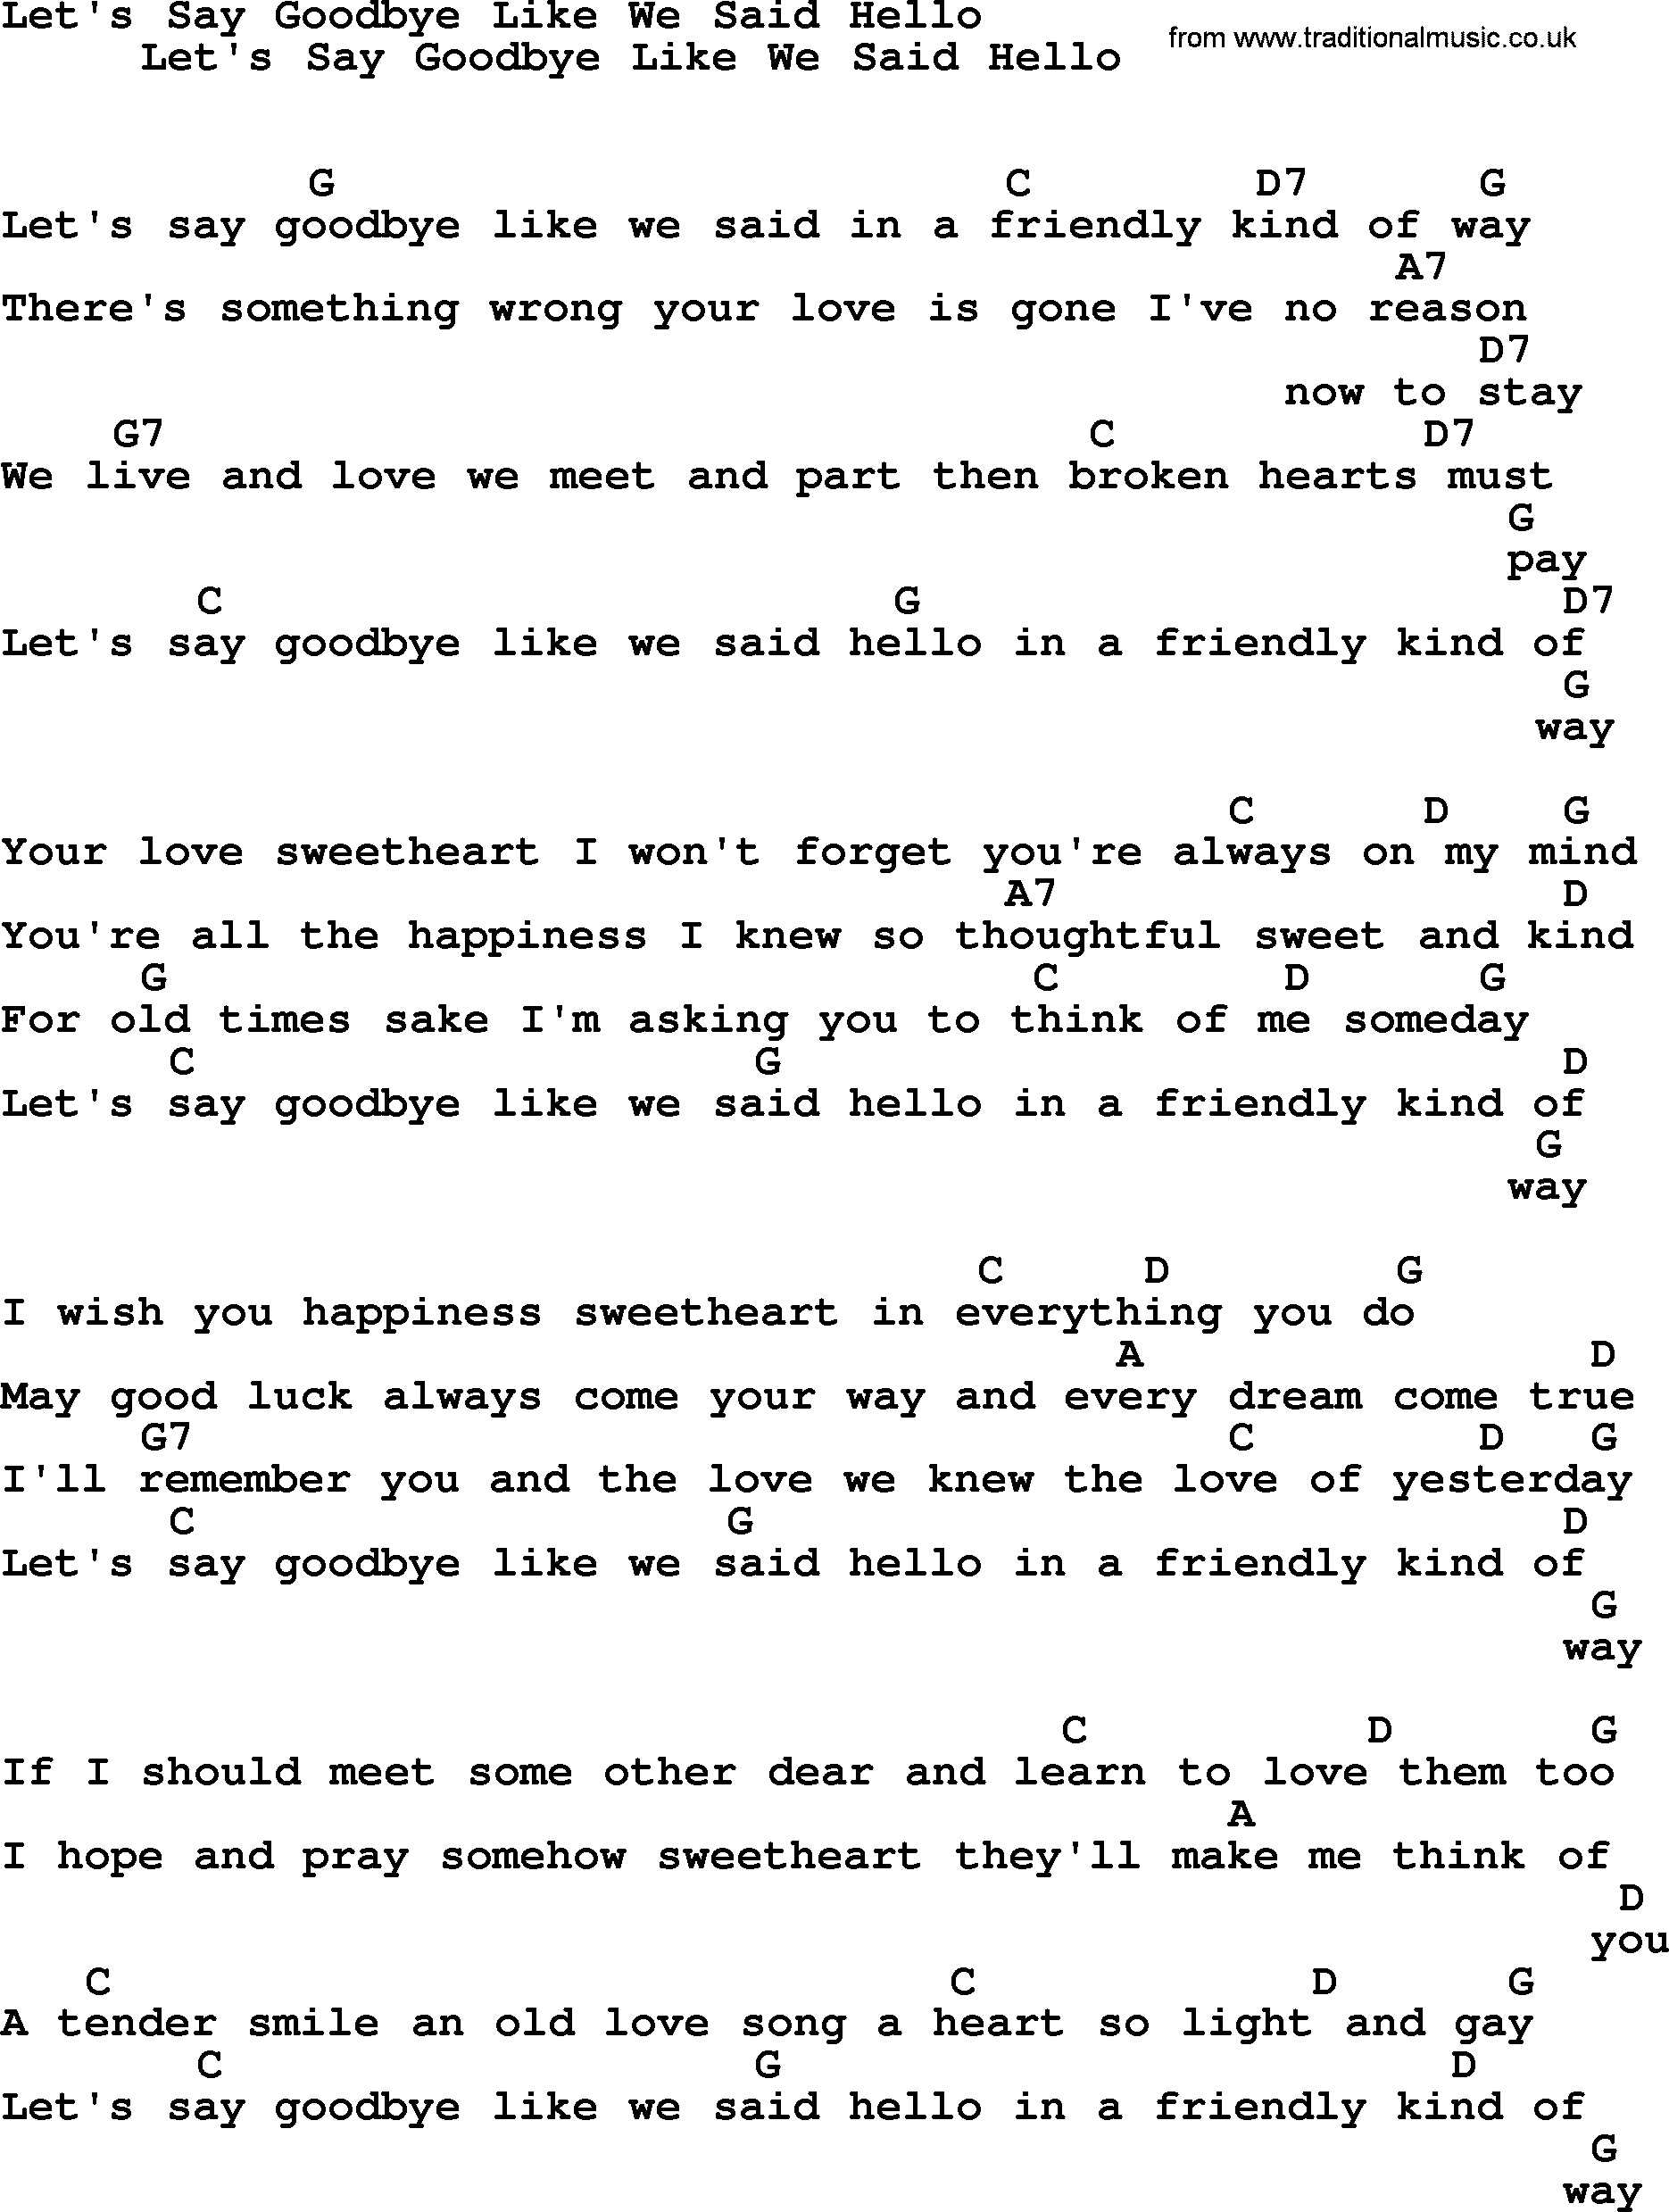 Bluegrass song: Let's Say Goodbye Like We Said Hello, lyrics and chords